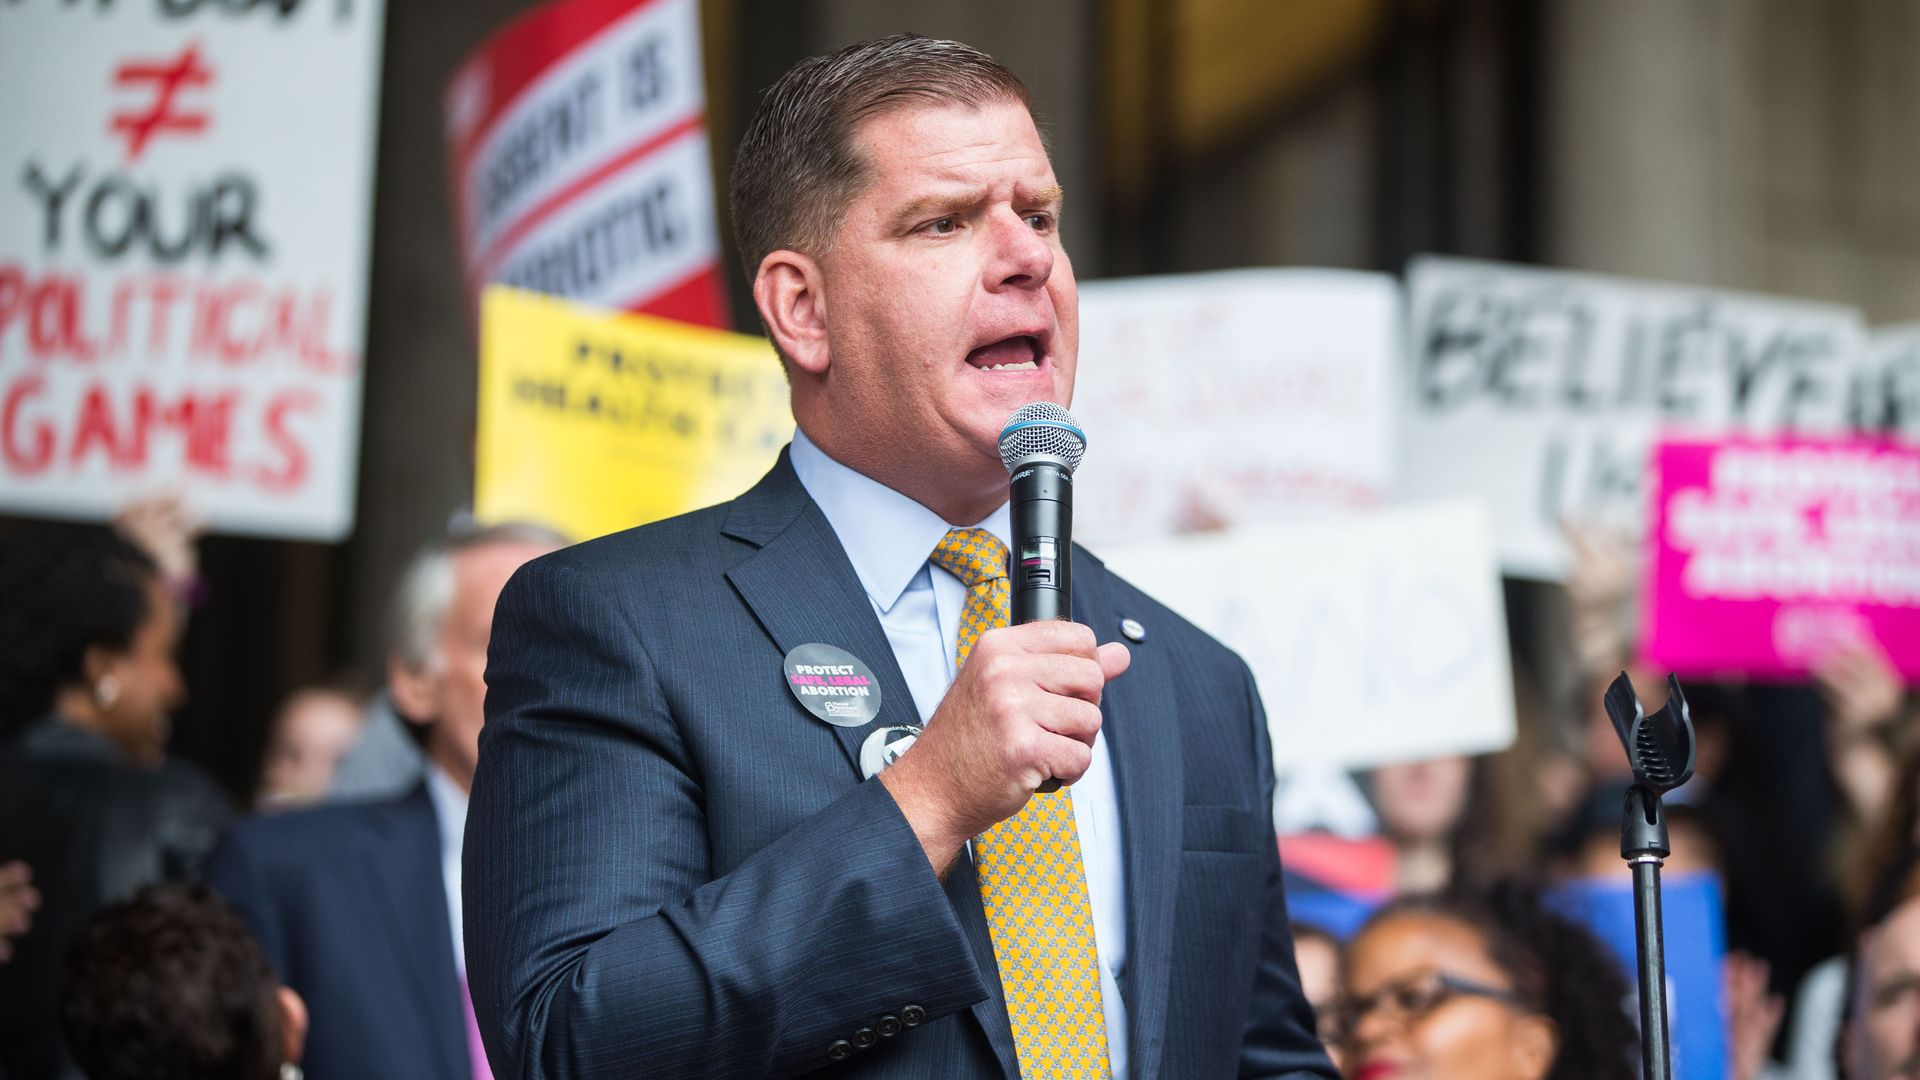 Boston Mayor Marty Walsh is shown delivering a speech.